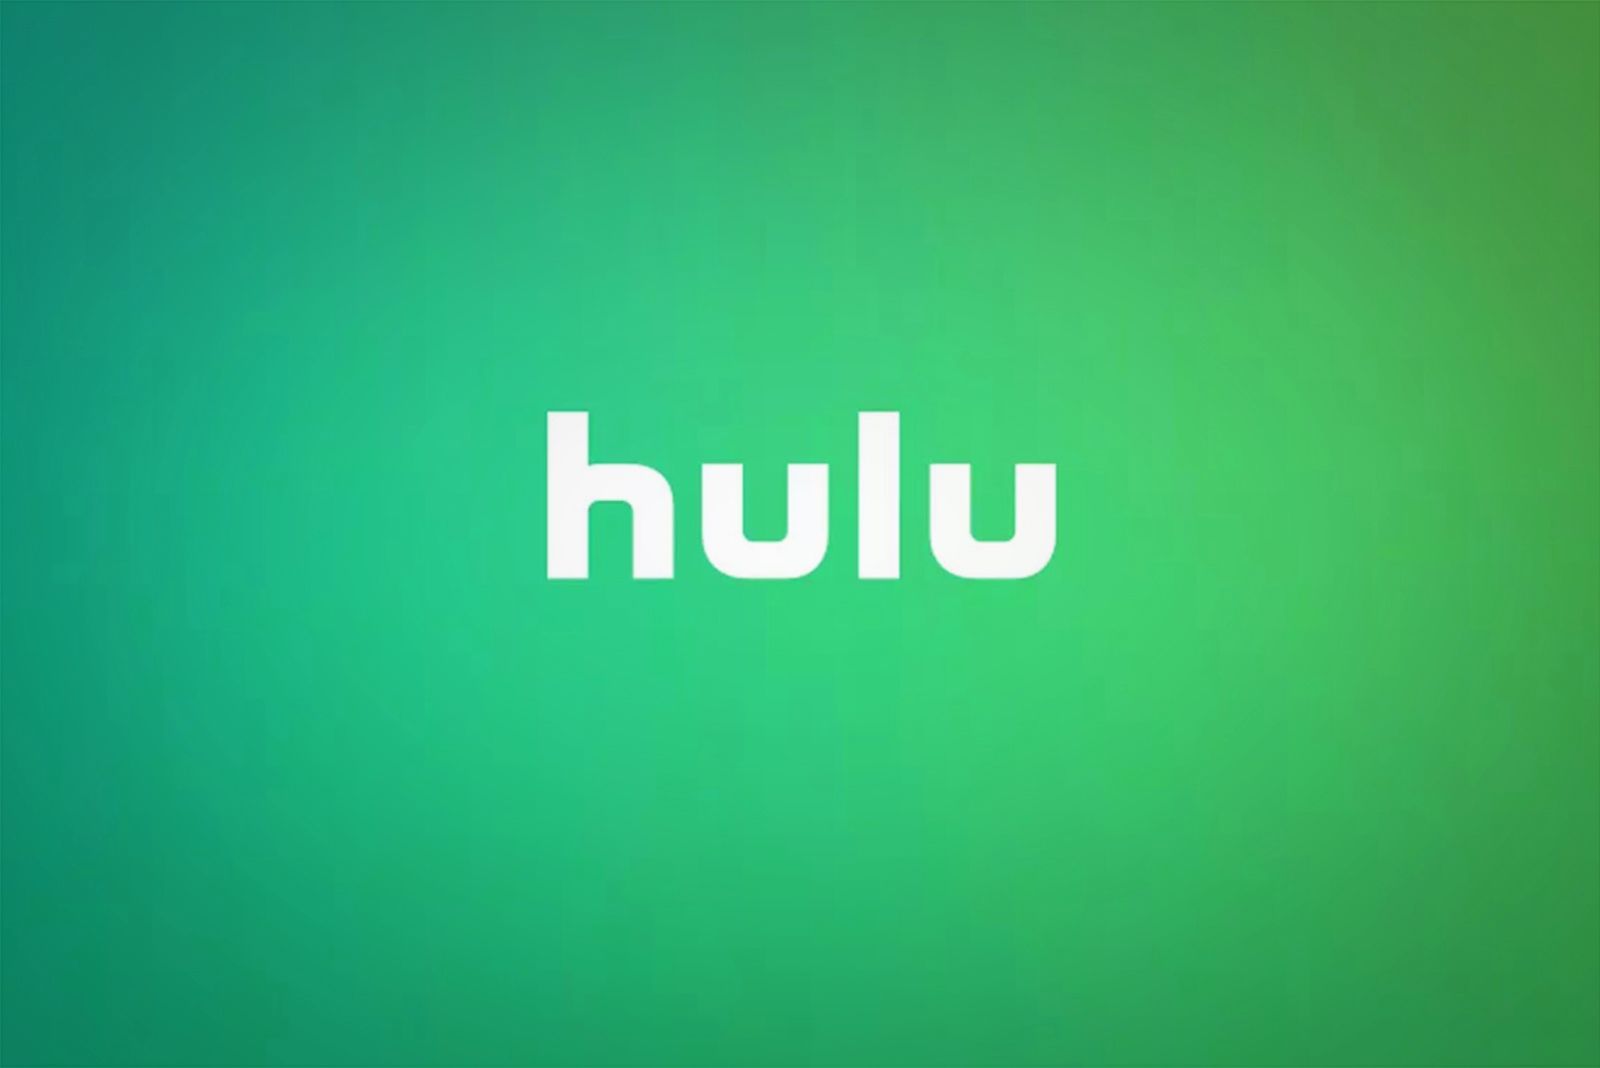 Hulu streaming service will finally expand internationally in 2021 Disney reveals image 1